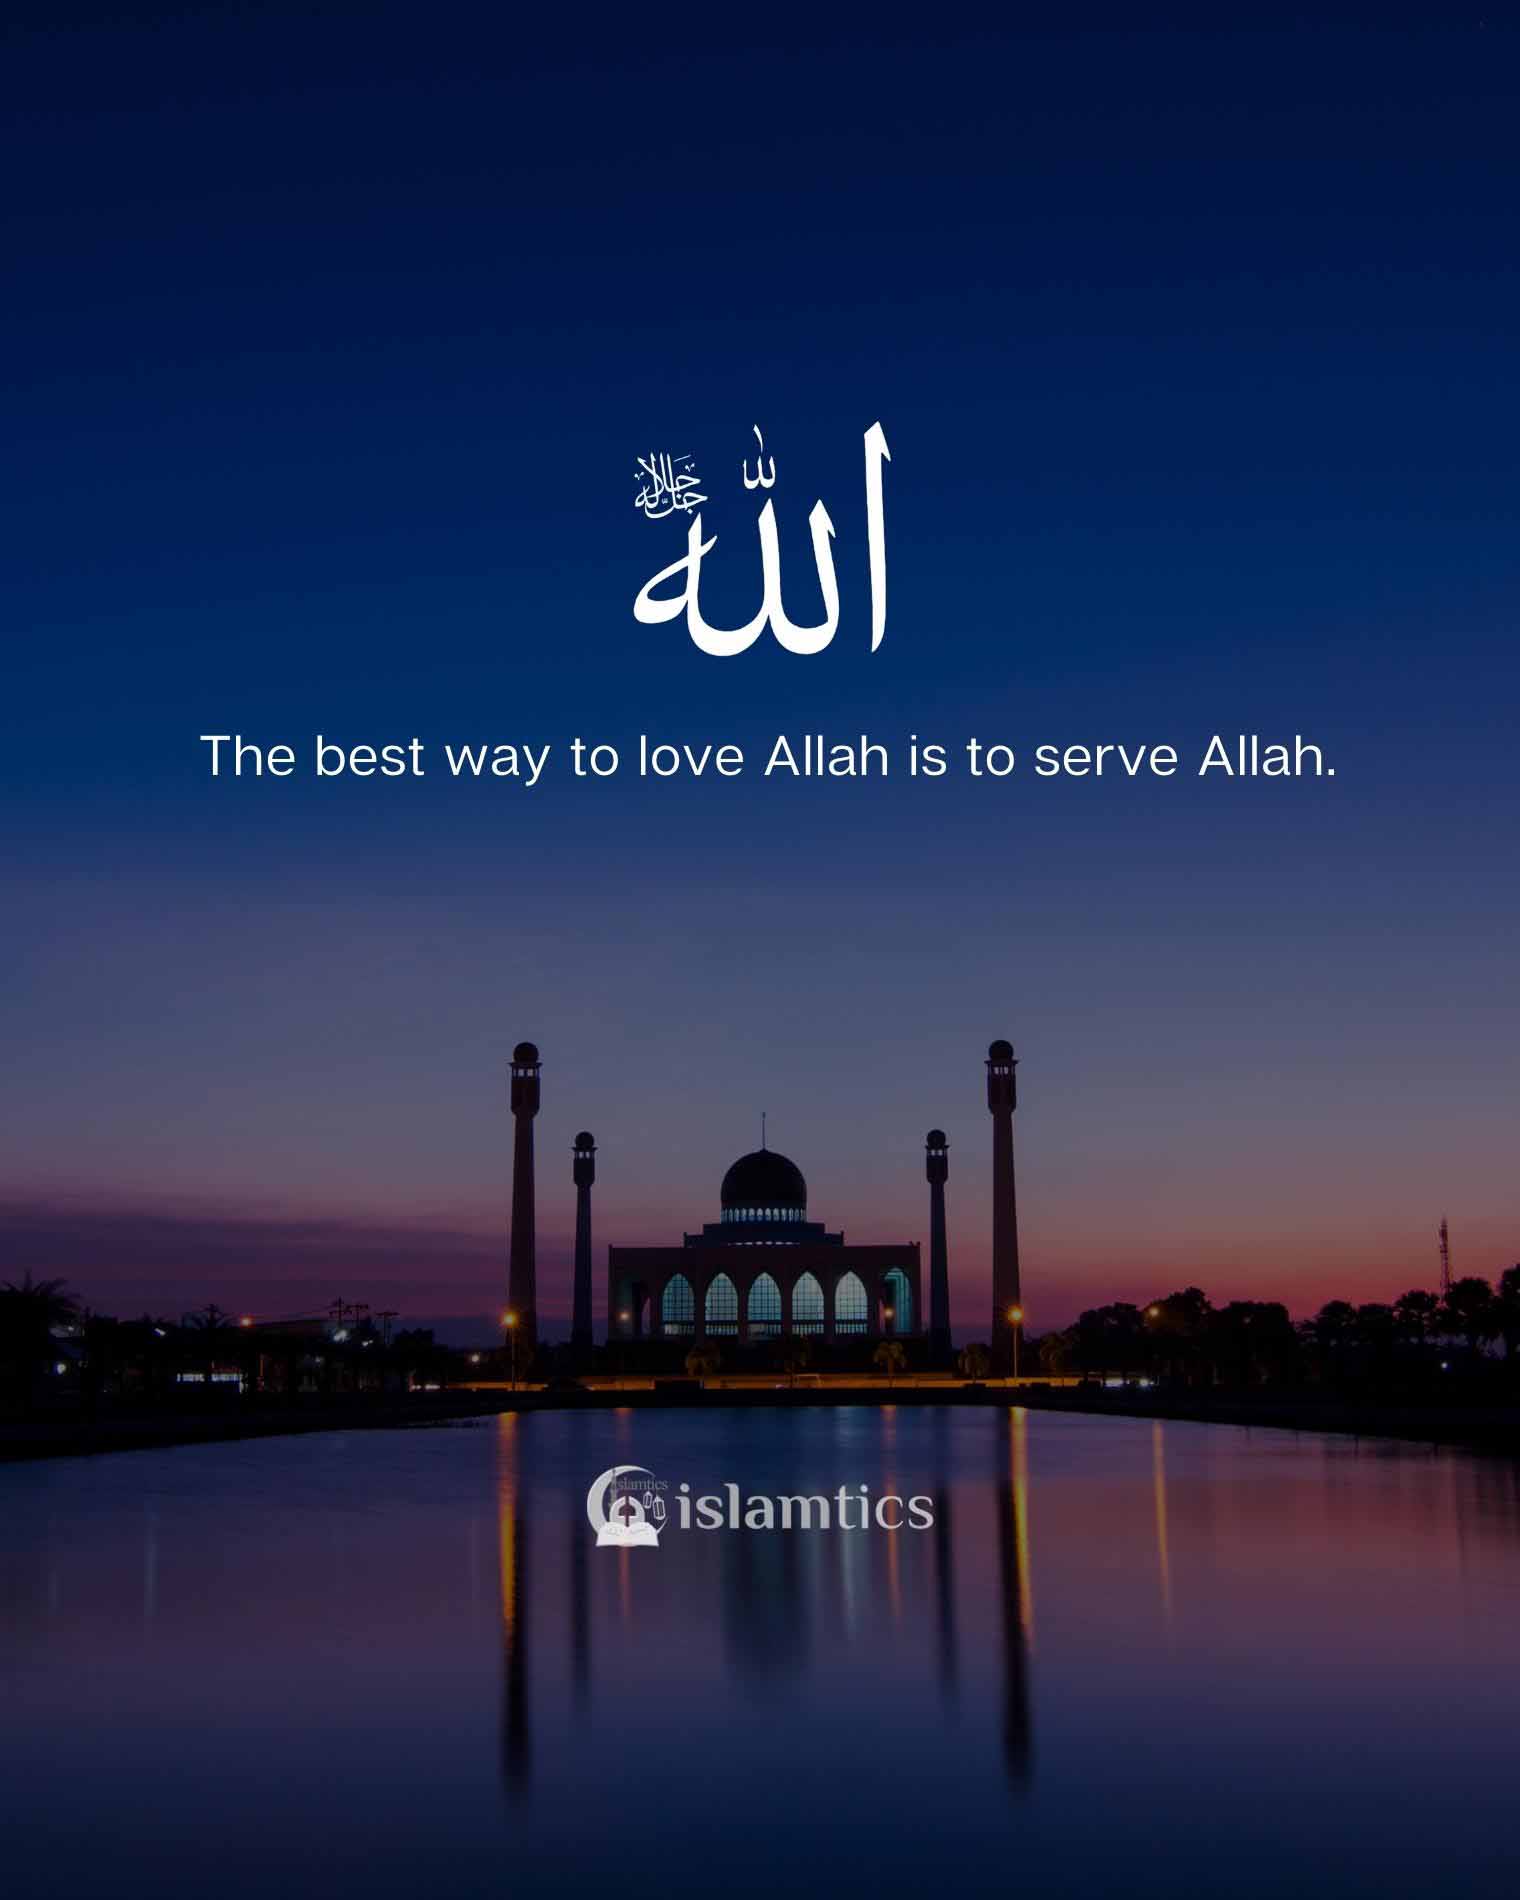  The best way to love Allah is to serve Allah.